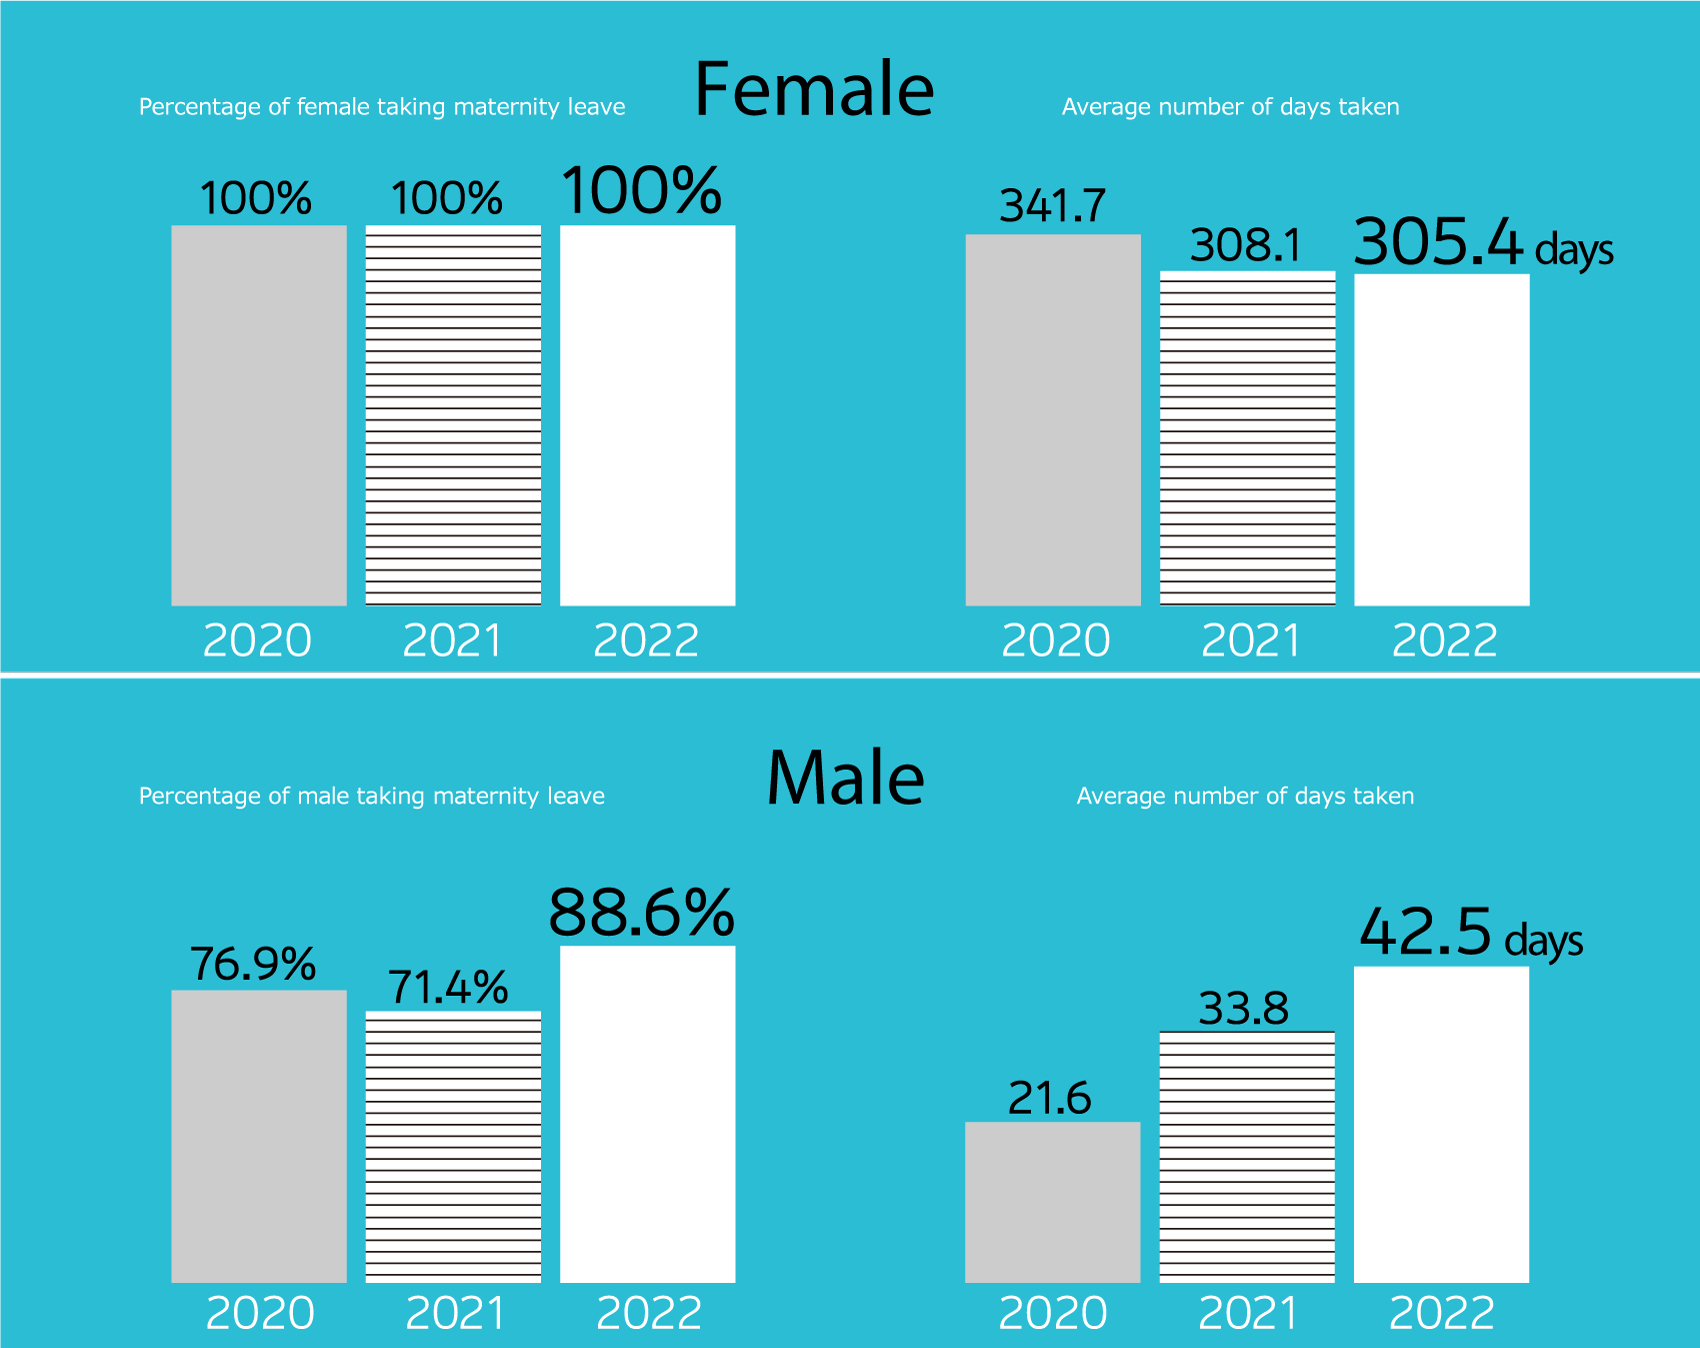 Percentage of male and female taking maternity leave and average number of days taken